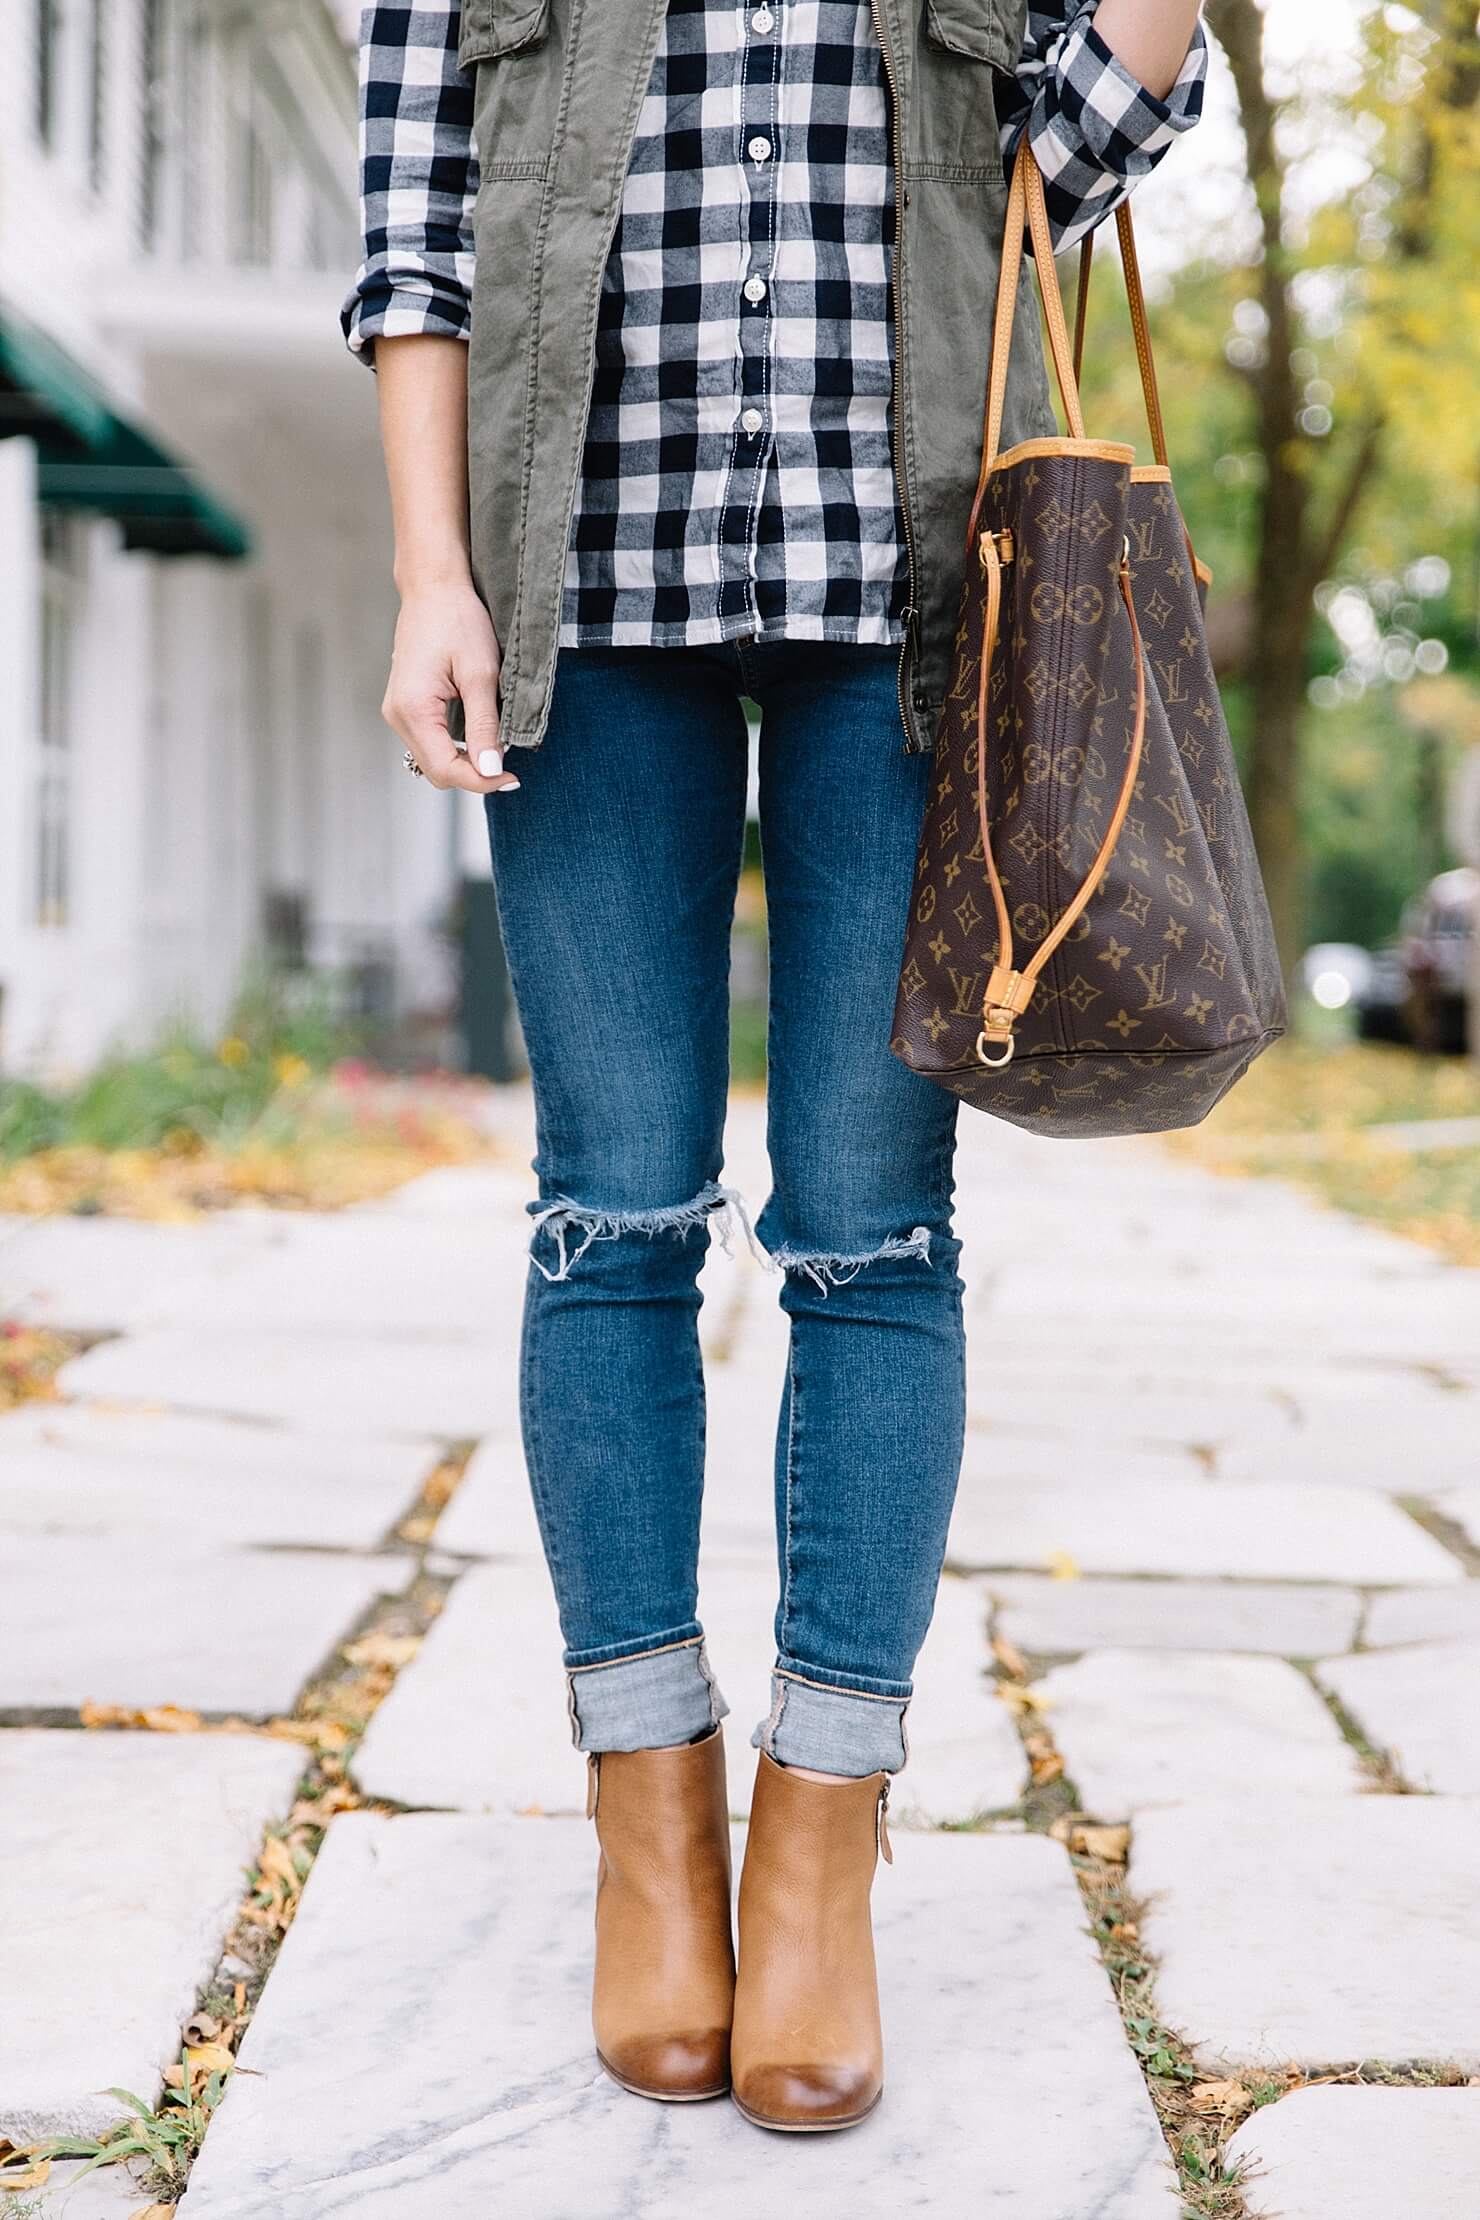 gingham shirt, rolled up jeans, cognac ankle booties, rolled jeans and booties